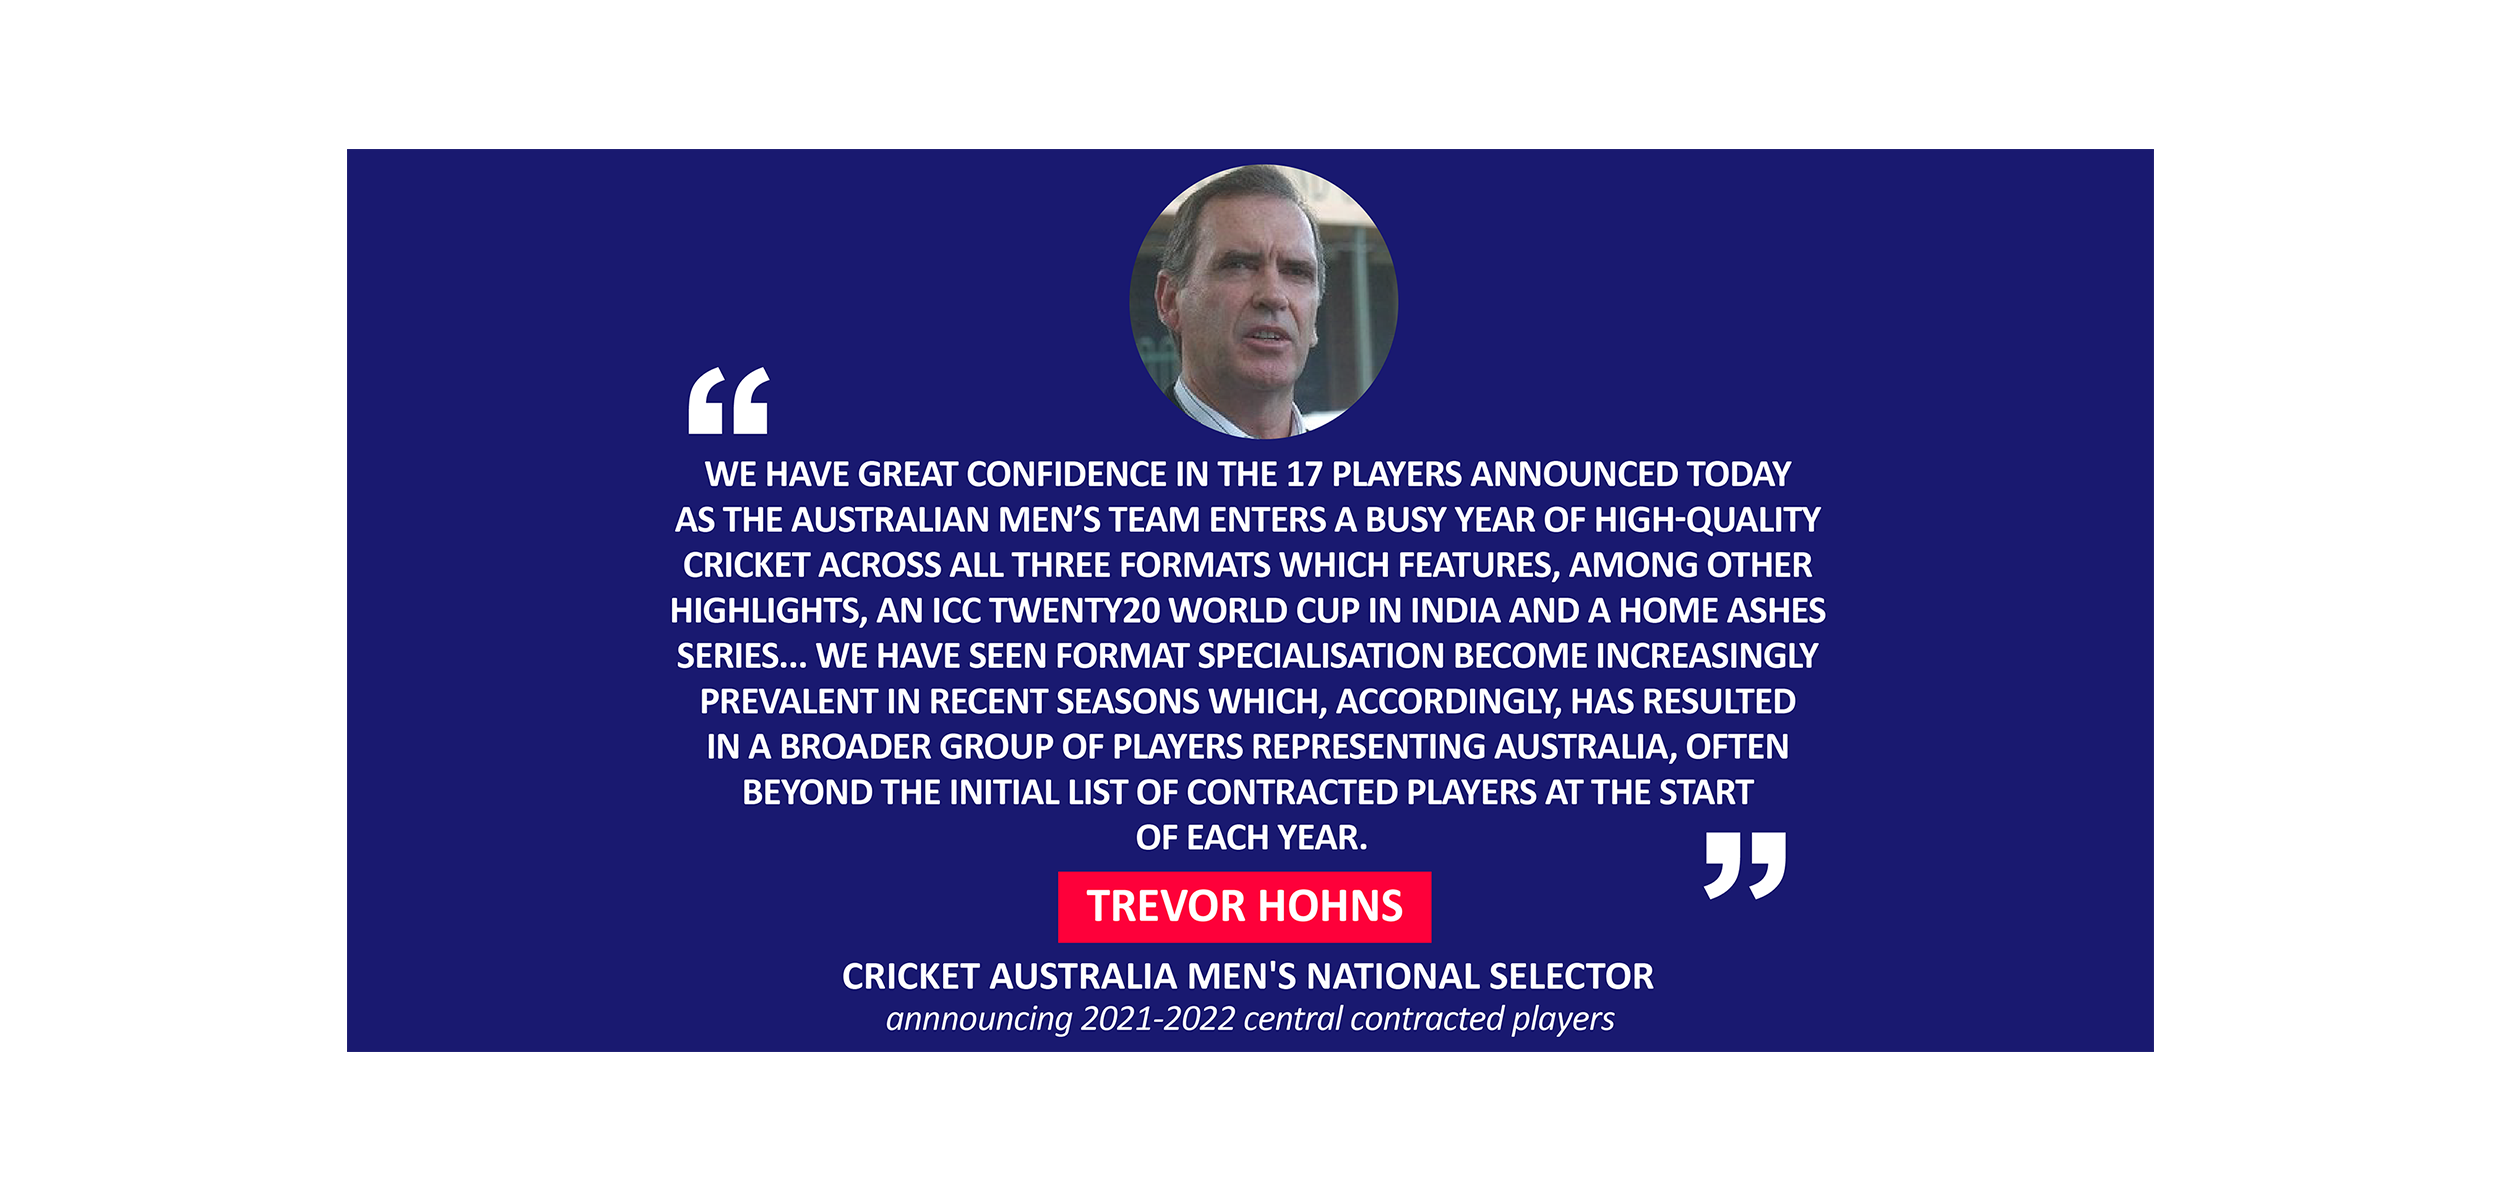 Trevor Hohns, Cricket Australia Men's National Selector annnouncing 2021-2022 central contracted players